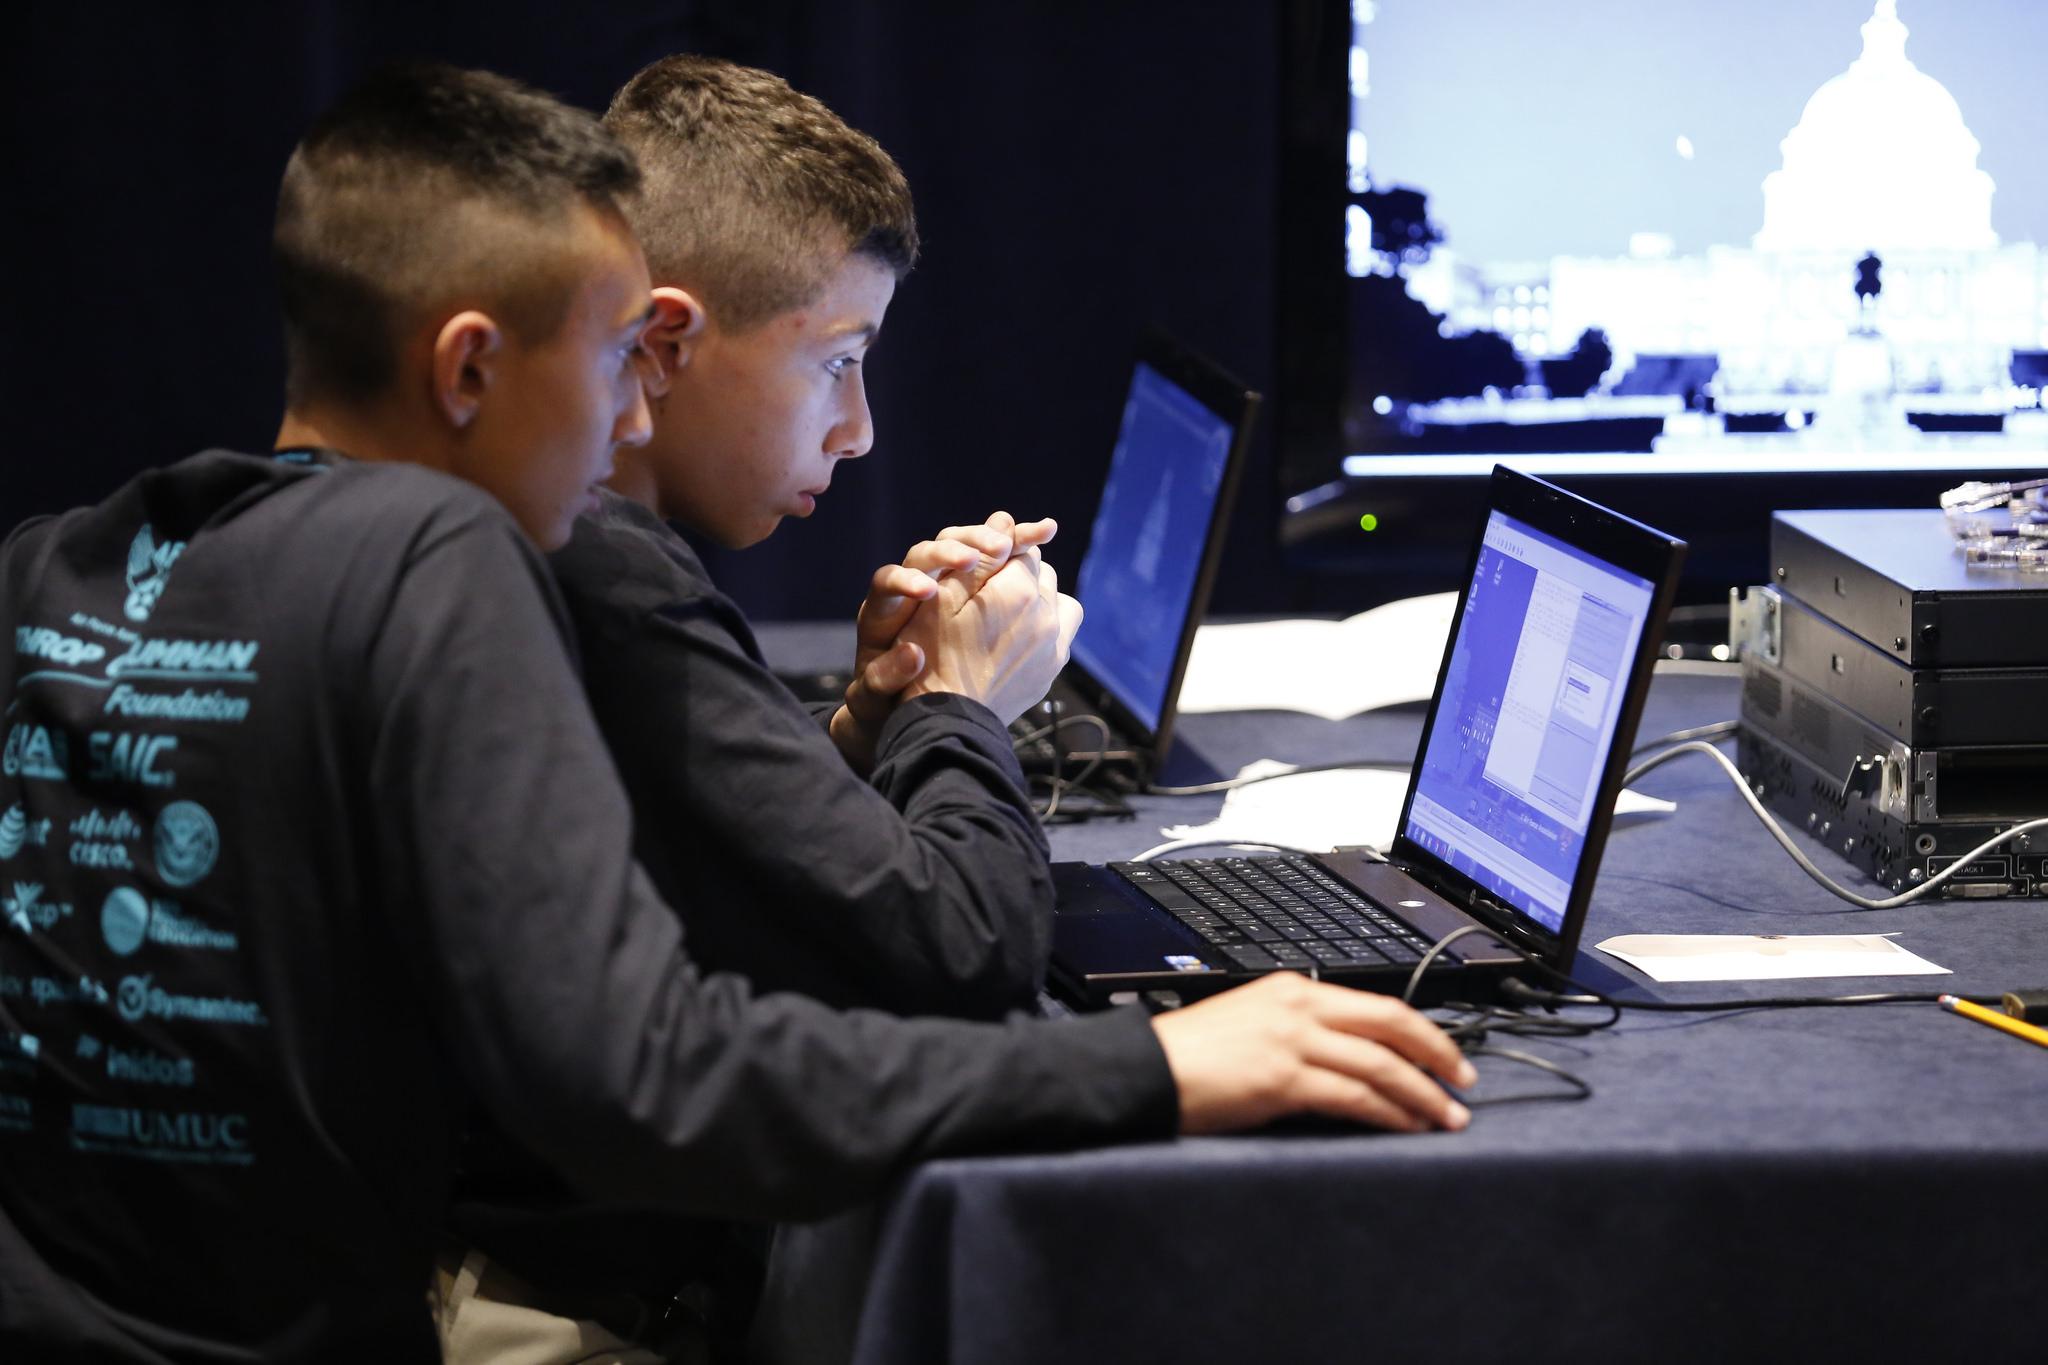 Students participate in the U.S. CyberPatriots competition, sponsored by the U.S. Air Force and Air Force Association. (U.S. Air Force)